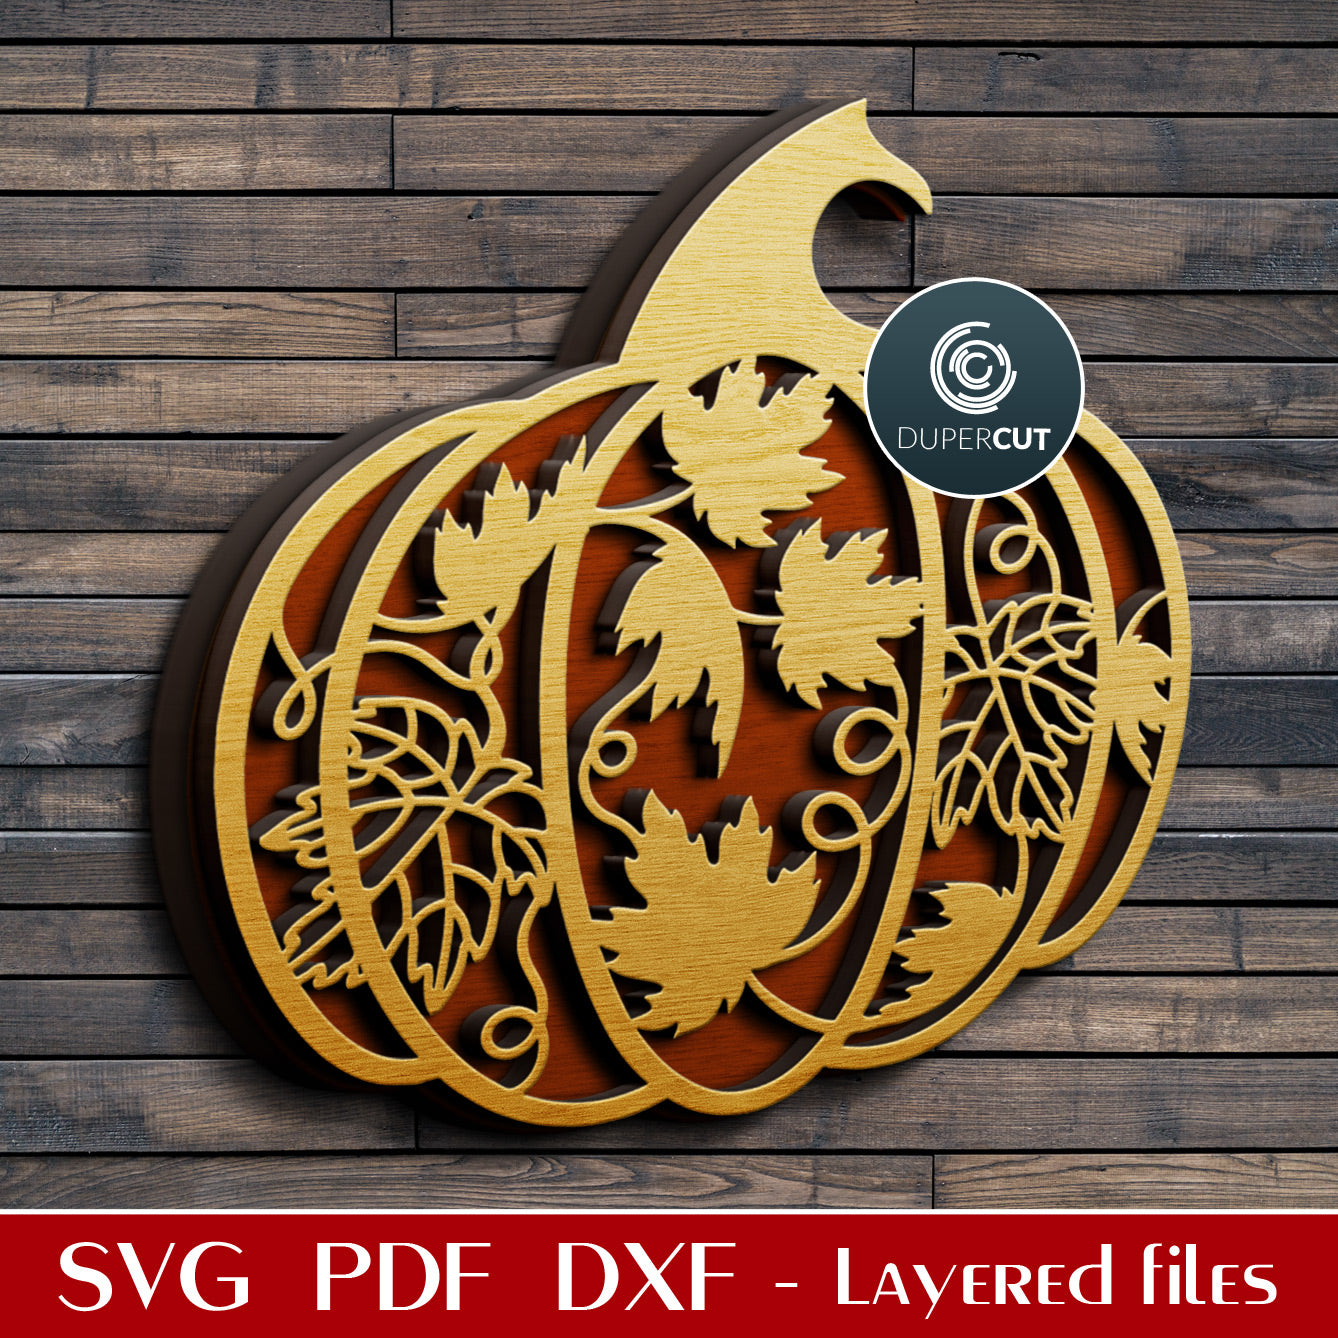 Thanksgiving pumpkin with fall leaves pattern SVG PNG DXF layered laser cutting files for Glowforge, CNC plasma machines, Cricut, Silhouette by DuperCut